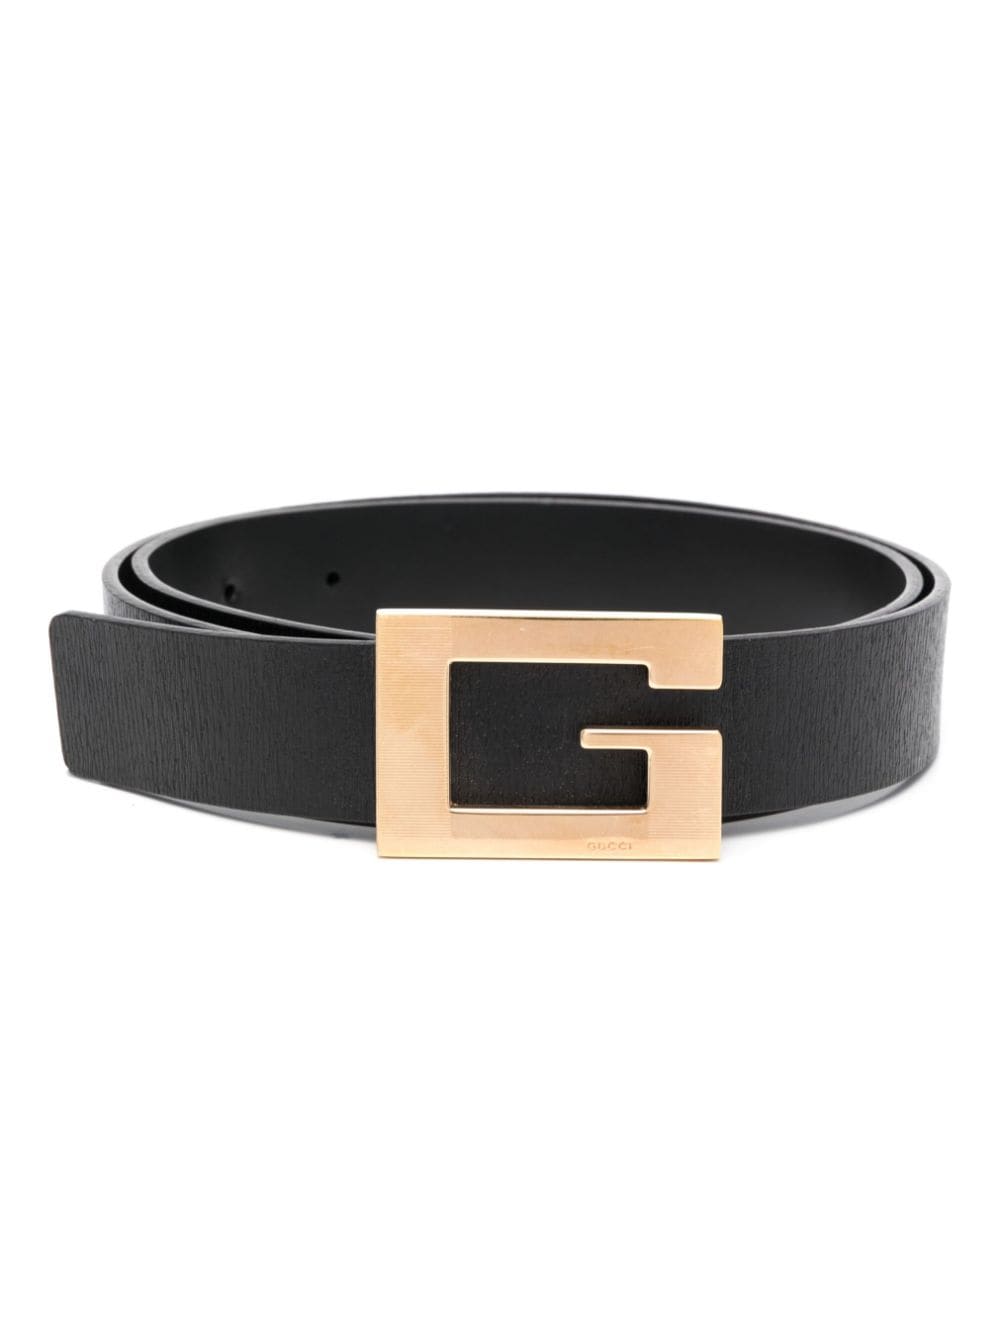 Gucci Pre-Owned 2010 Square G buckle belt - Black von Gucci Pre-Owned